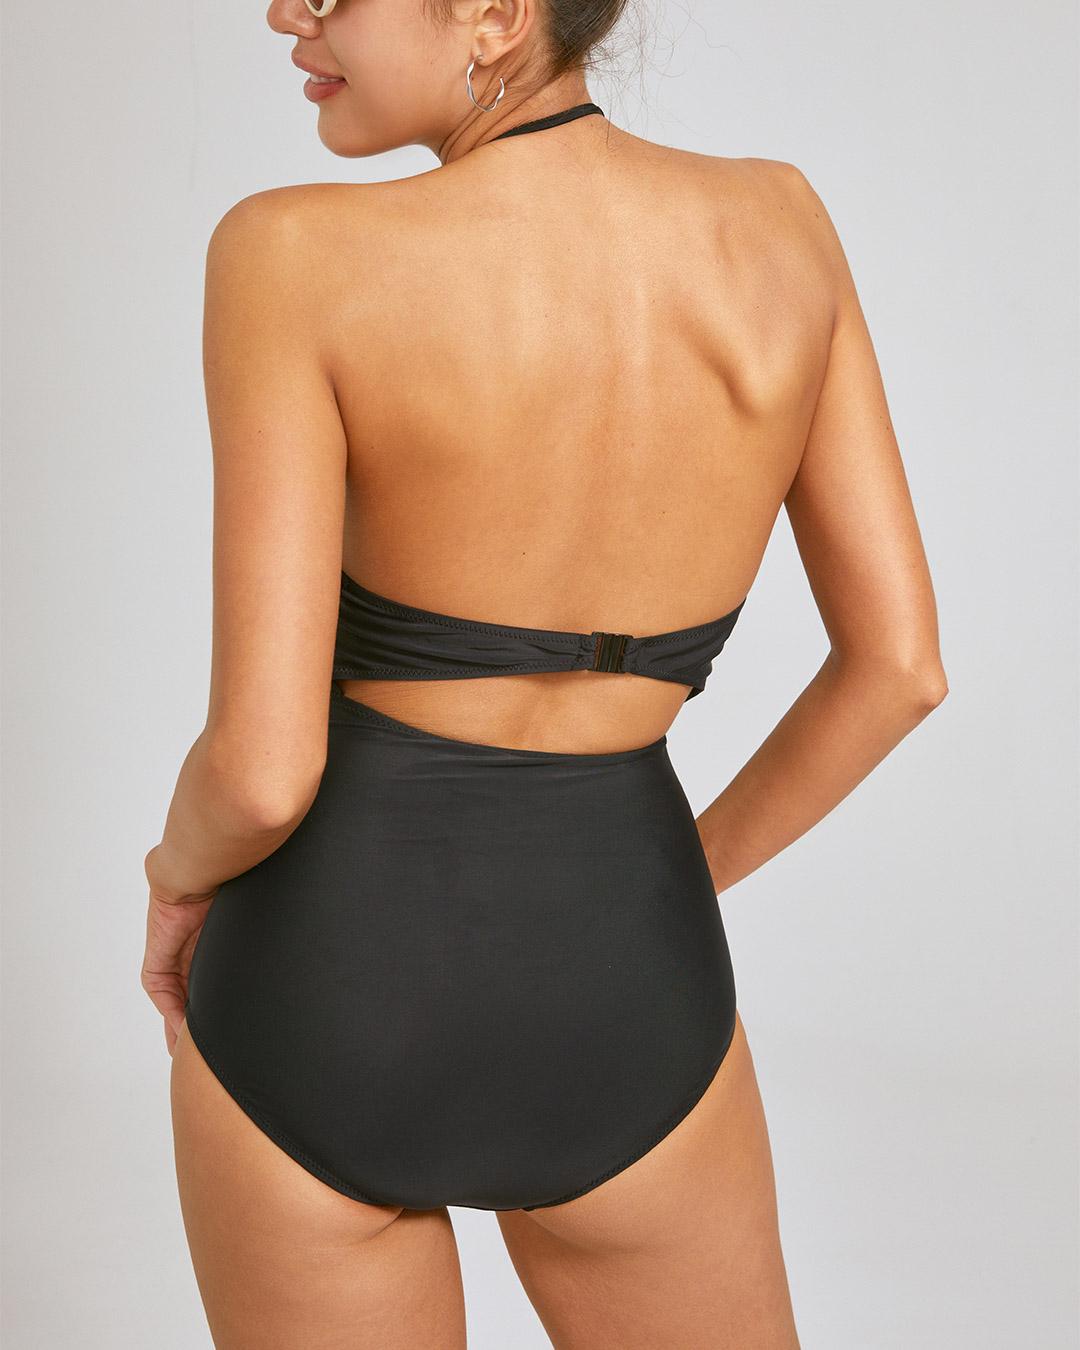 Cut-outs Scalloped Edge One-pieces Swimwear